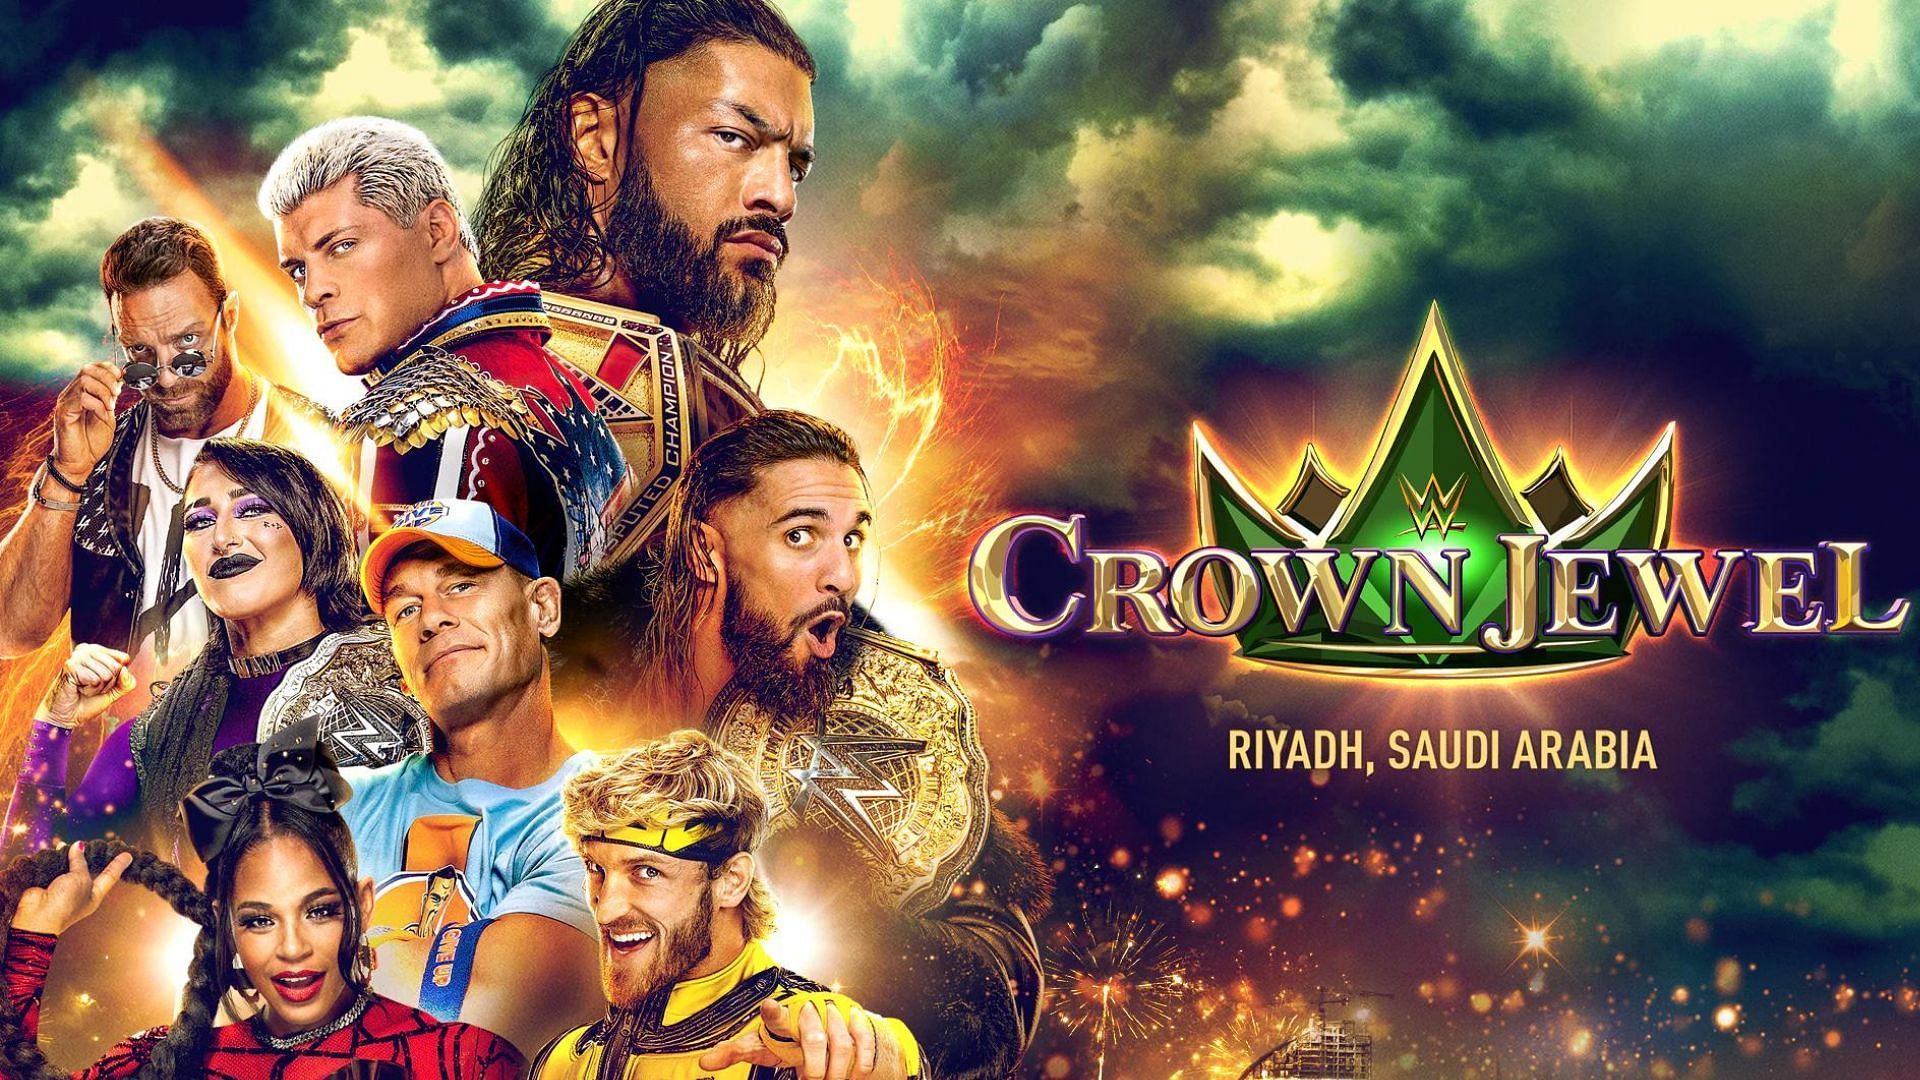 Crown Jewel 2023 will air this Saturday.